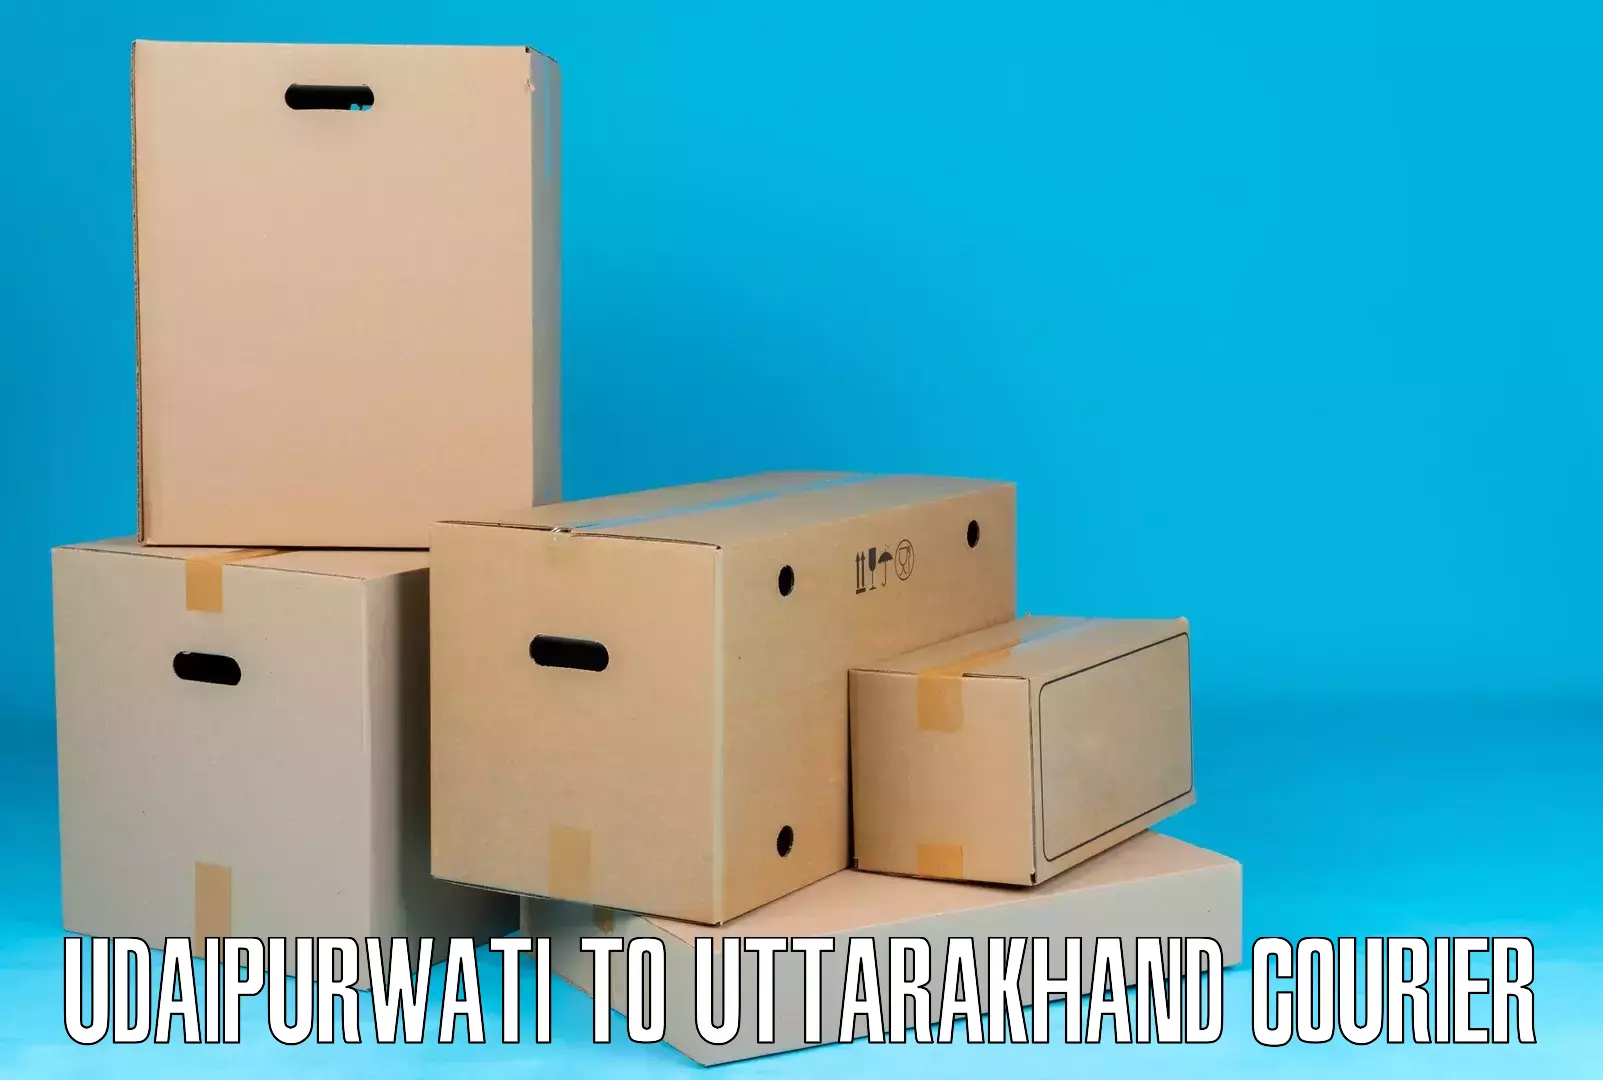 Express delivery capabilities Udaipurwati to Roorkee